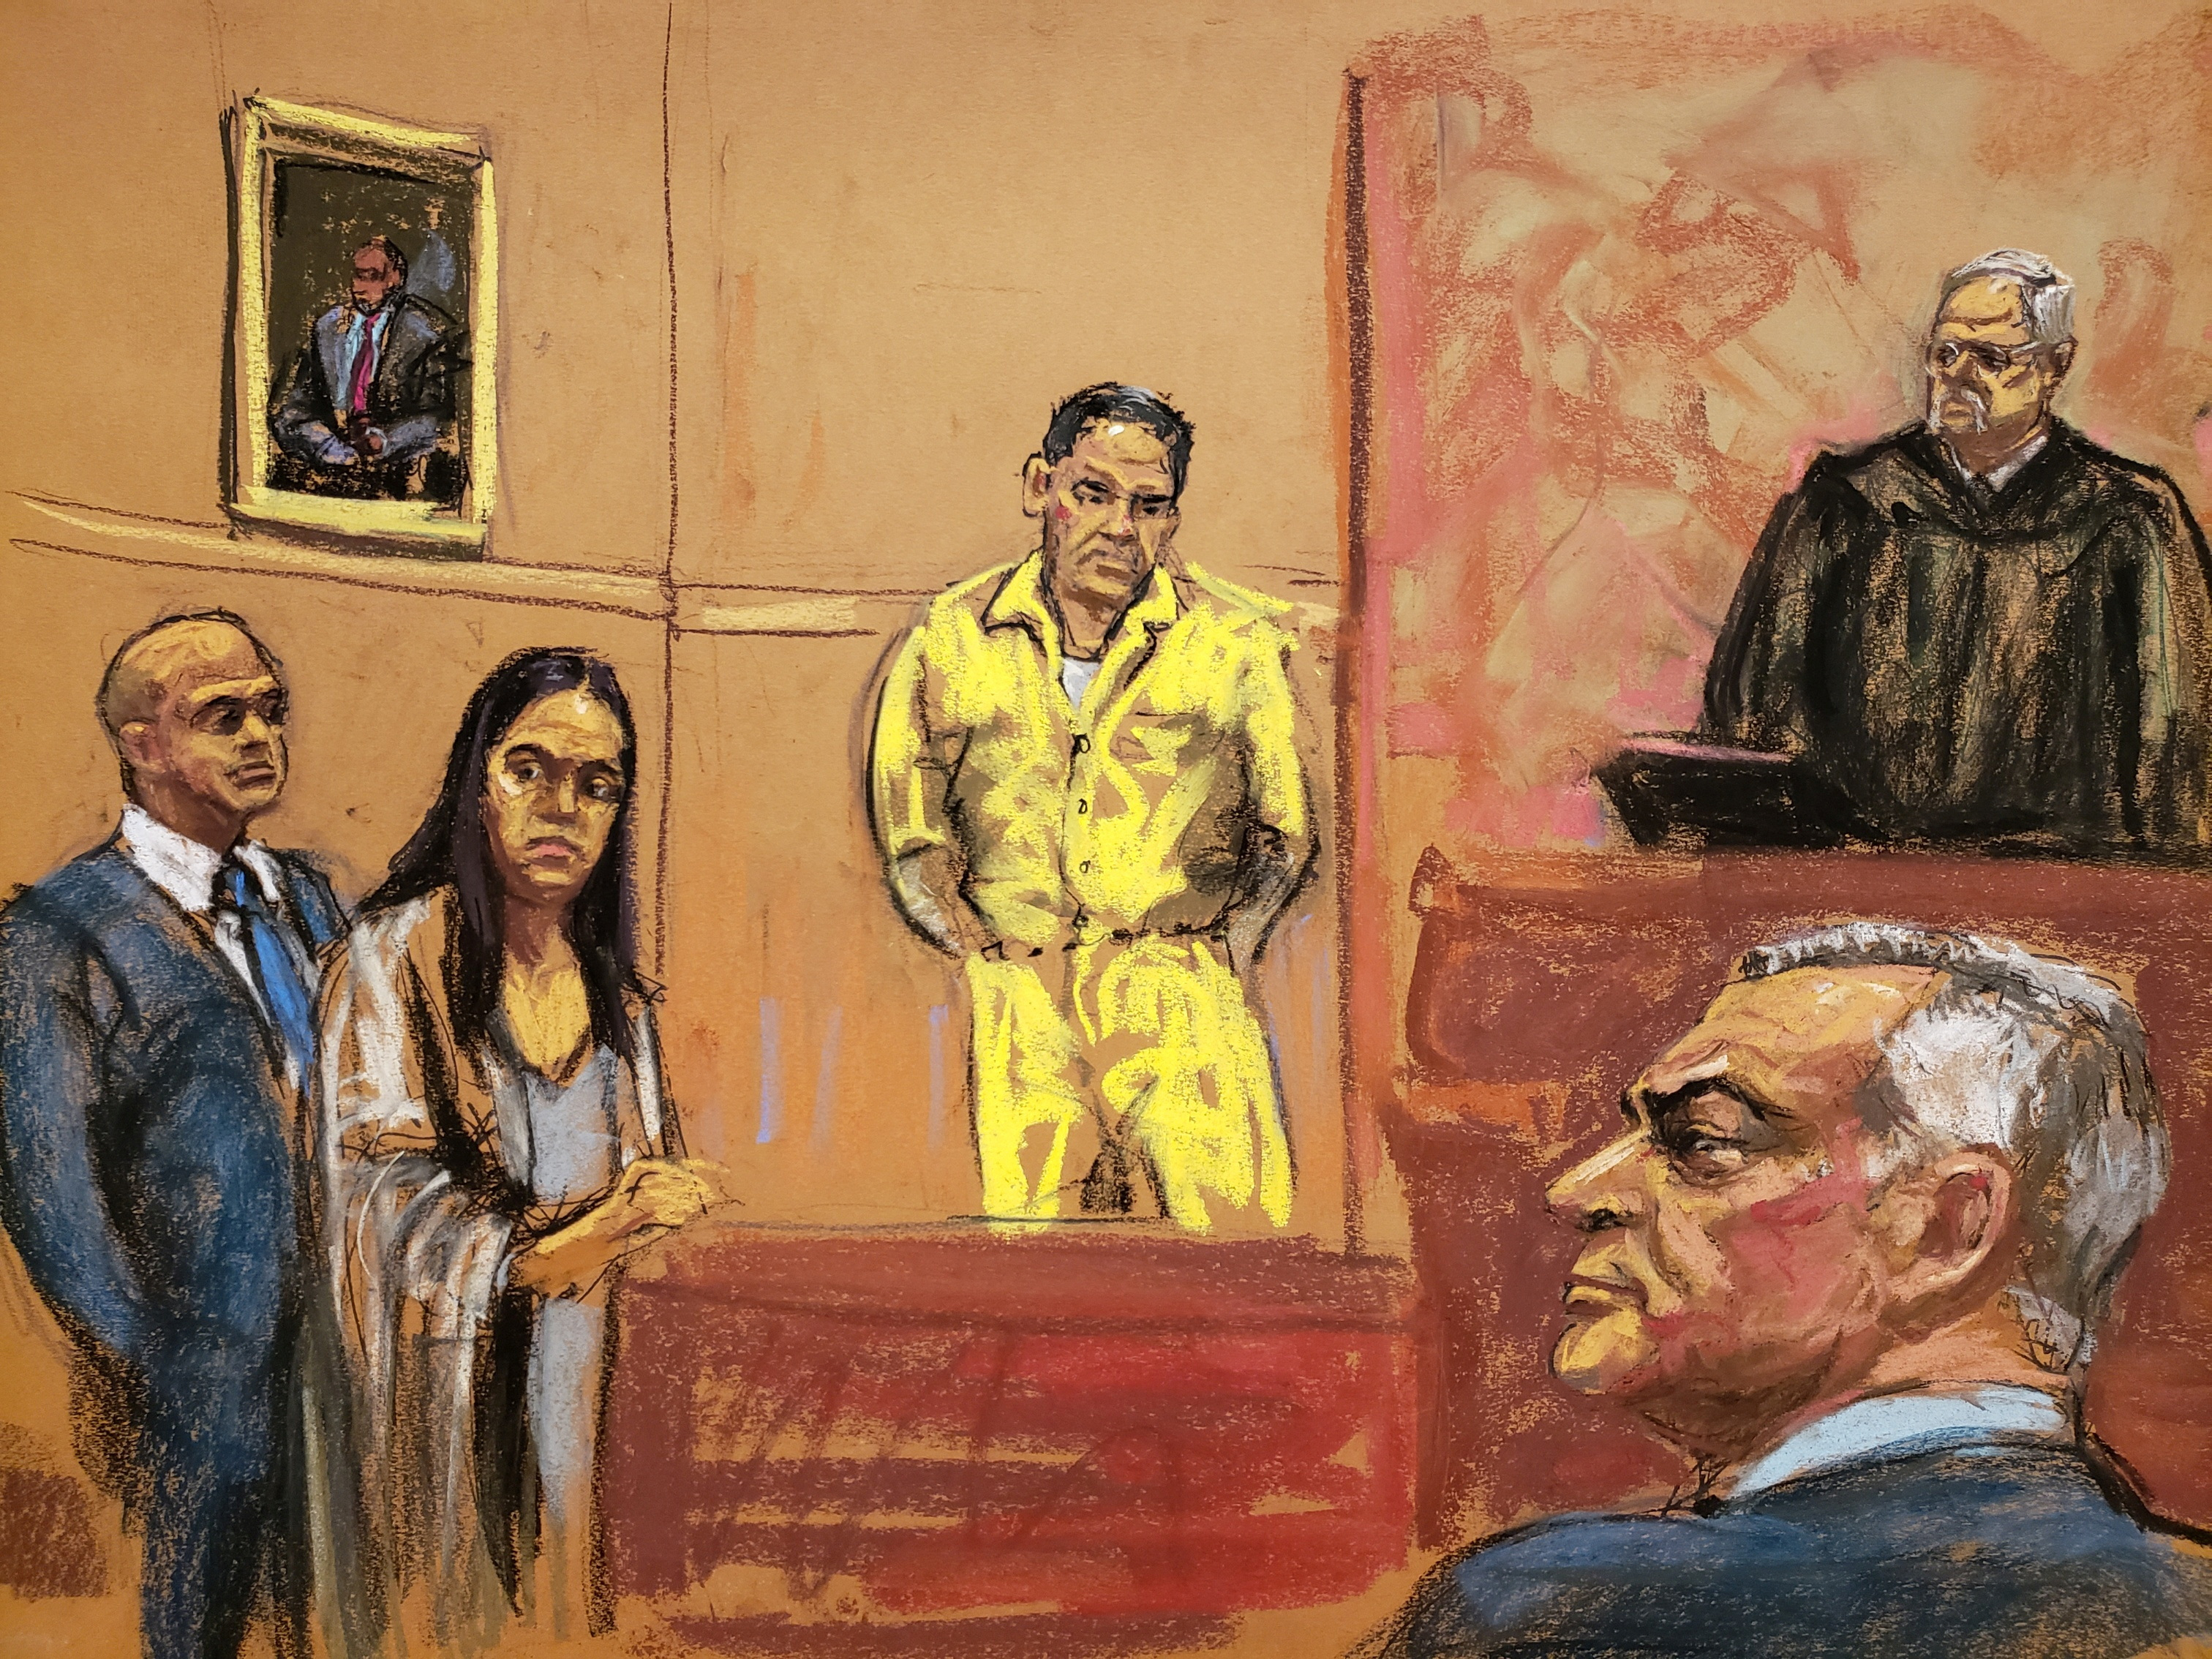 Oscar Nava Valencia looks at Garcia Luna as they all rise when the jury enters the room during the trial of Mexico's former Public Security Minister Genaro Garcia Luna on charges that he accepted millions of dollars to protect the powerful Sinaloa Cartel, once run by imprisoned drug lord Joaquin "El Chapo" Guzman, at a courthouse in New York City, US, January 30, 2023 in this courtroom sketch.  REUTERS/Jane Rosenberg